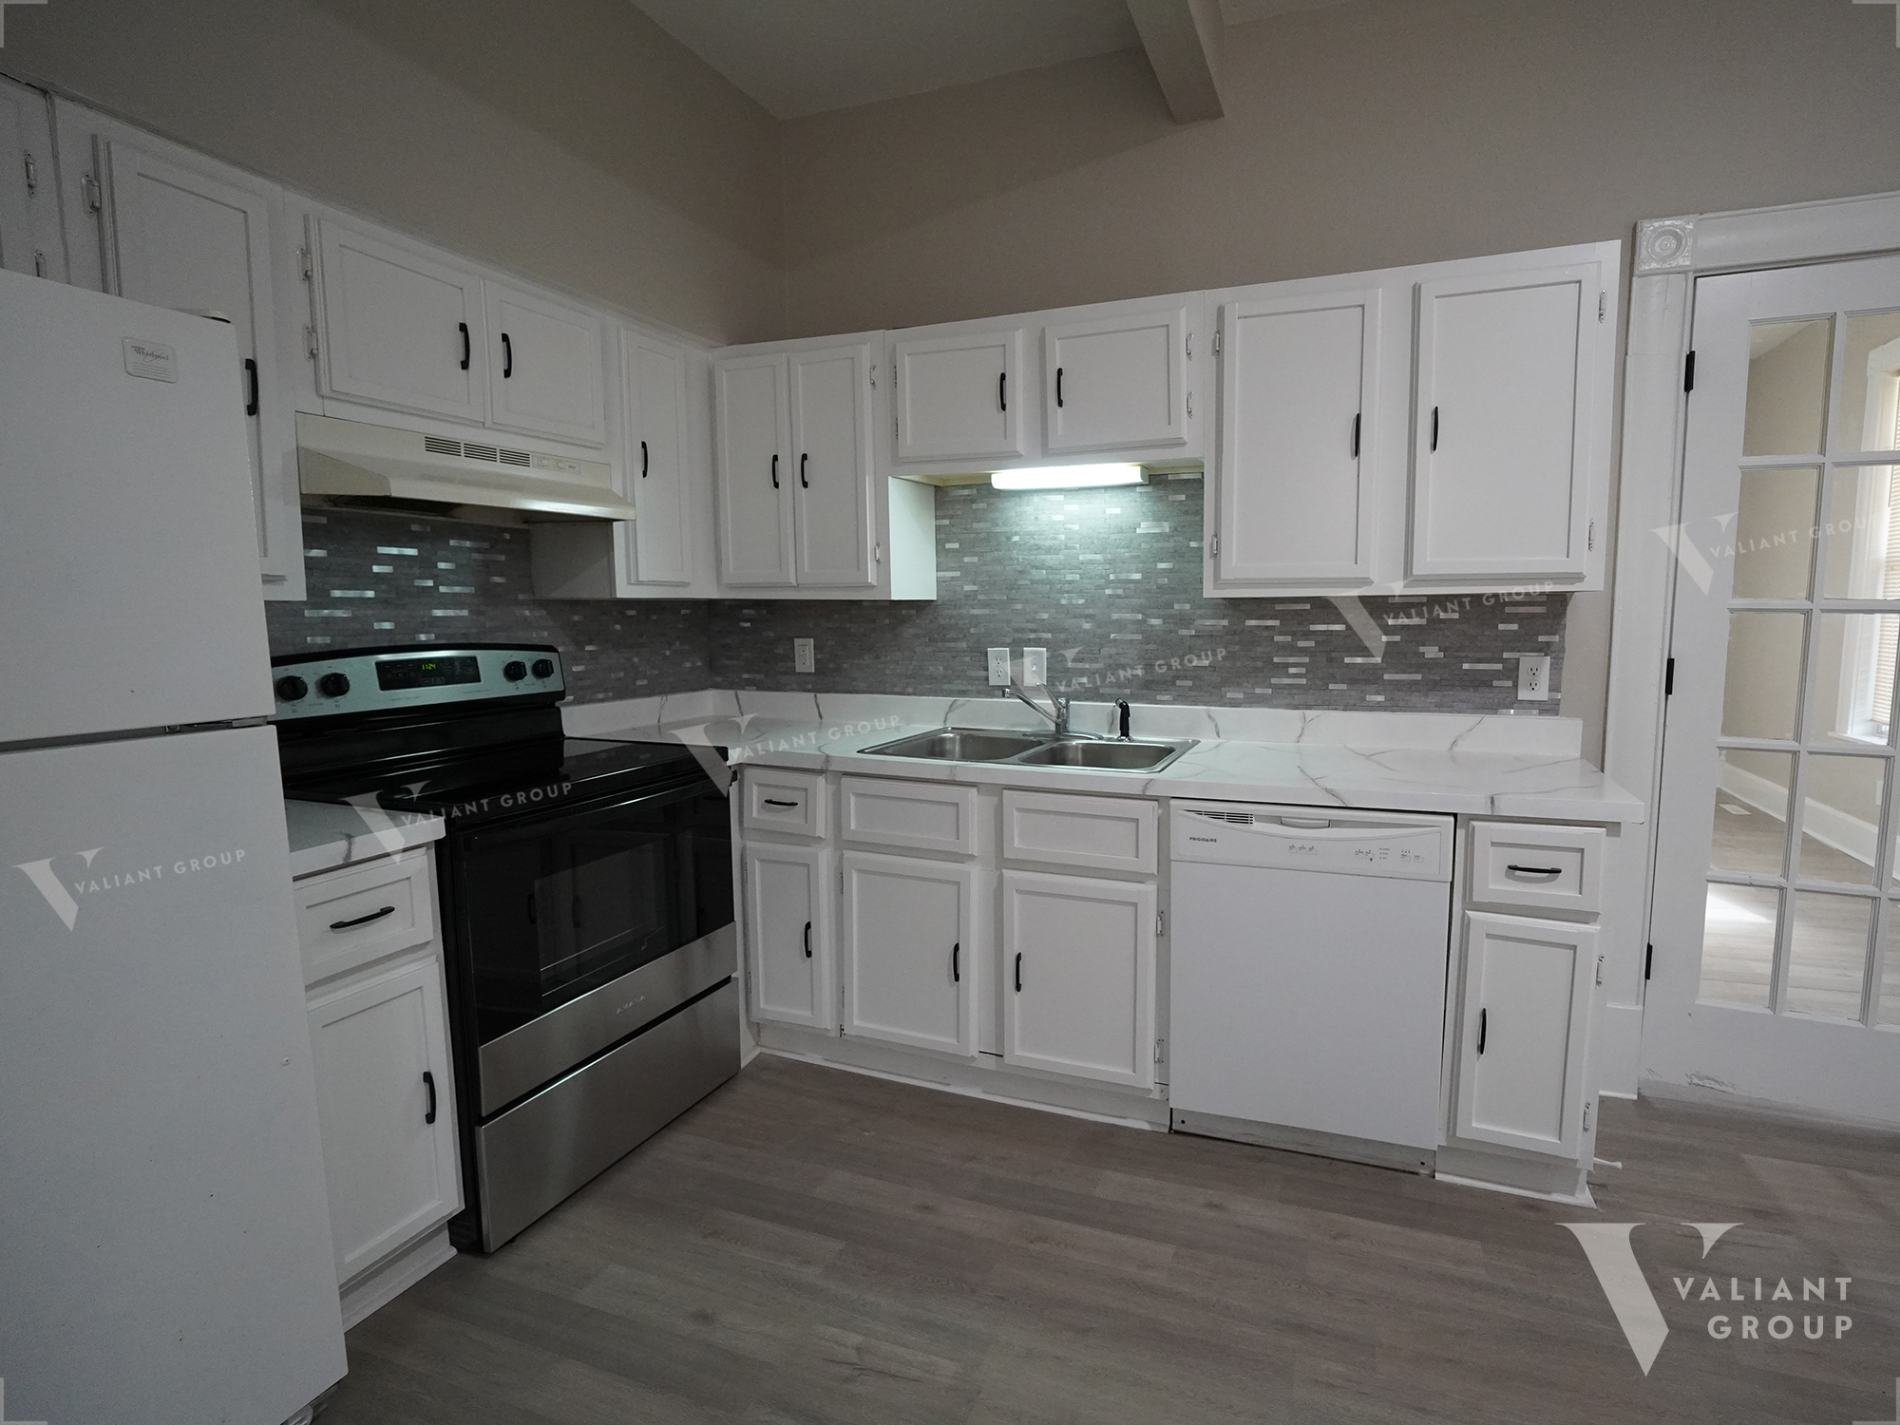 Apartment-Rental-Springfield-MO-320-S-Florence-A-09-Kitchen.jpg